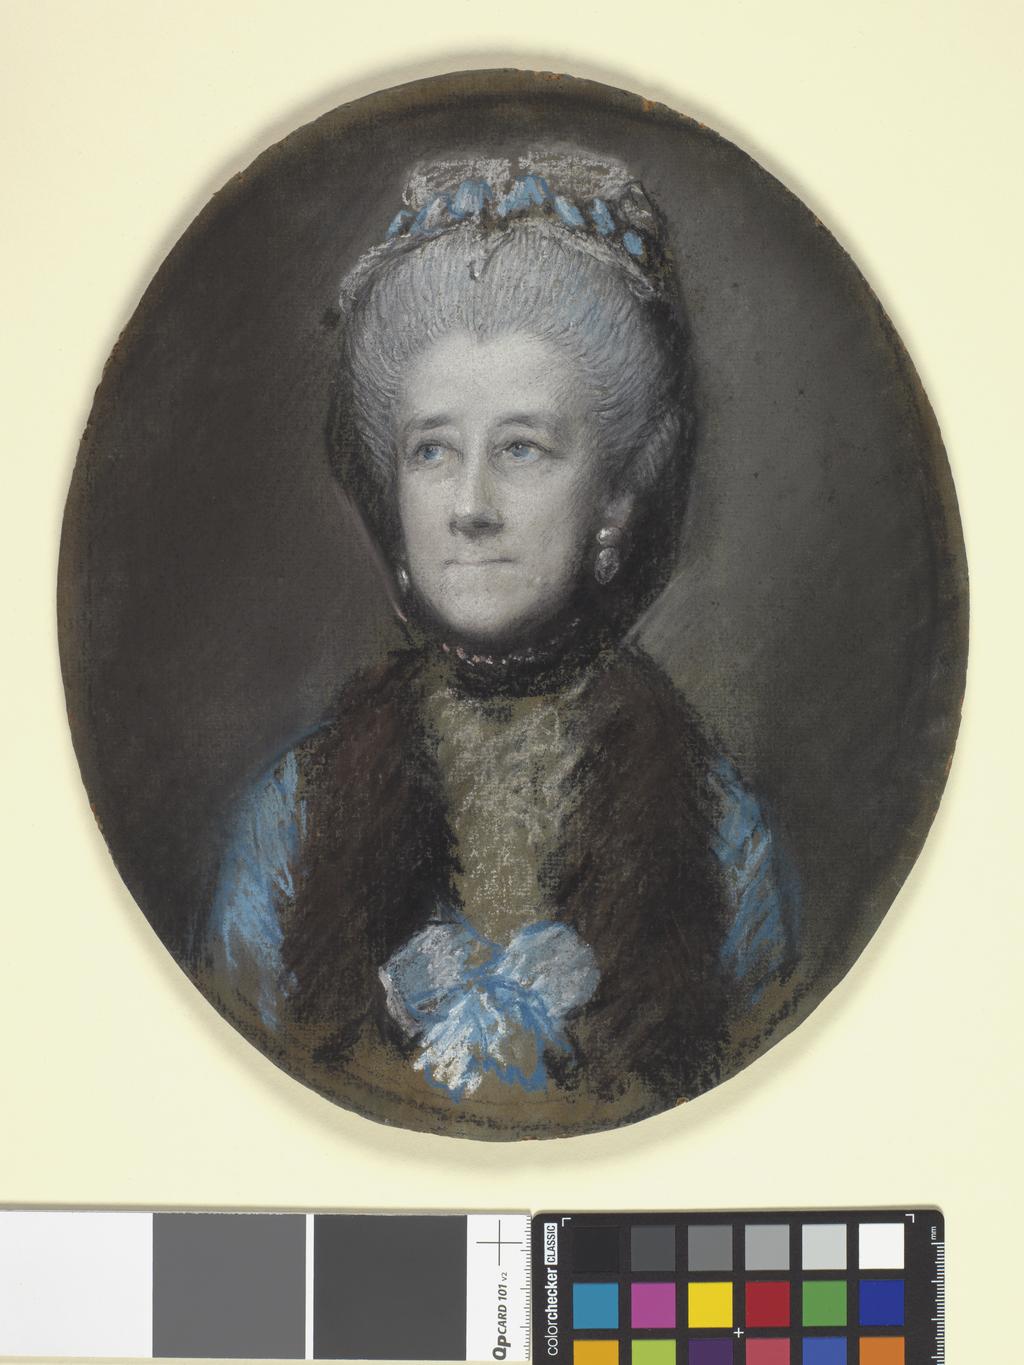 An image of Portrait of Gertrude Leveson-Gower, 4th Duchess of Bedford. Gainsborough, Thomas (British, 1727-1788). Pastel on grey paper, height 262 mm, width 224 mm, circa 1767.